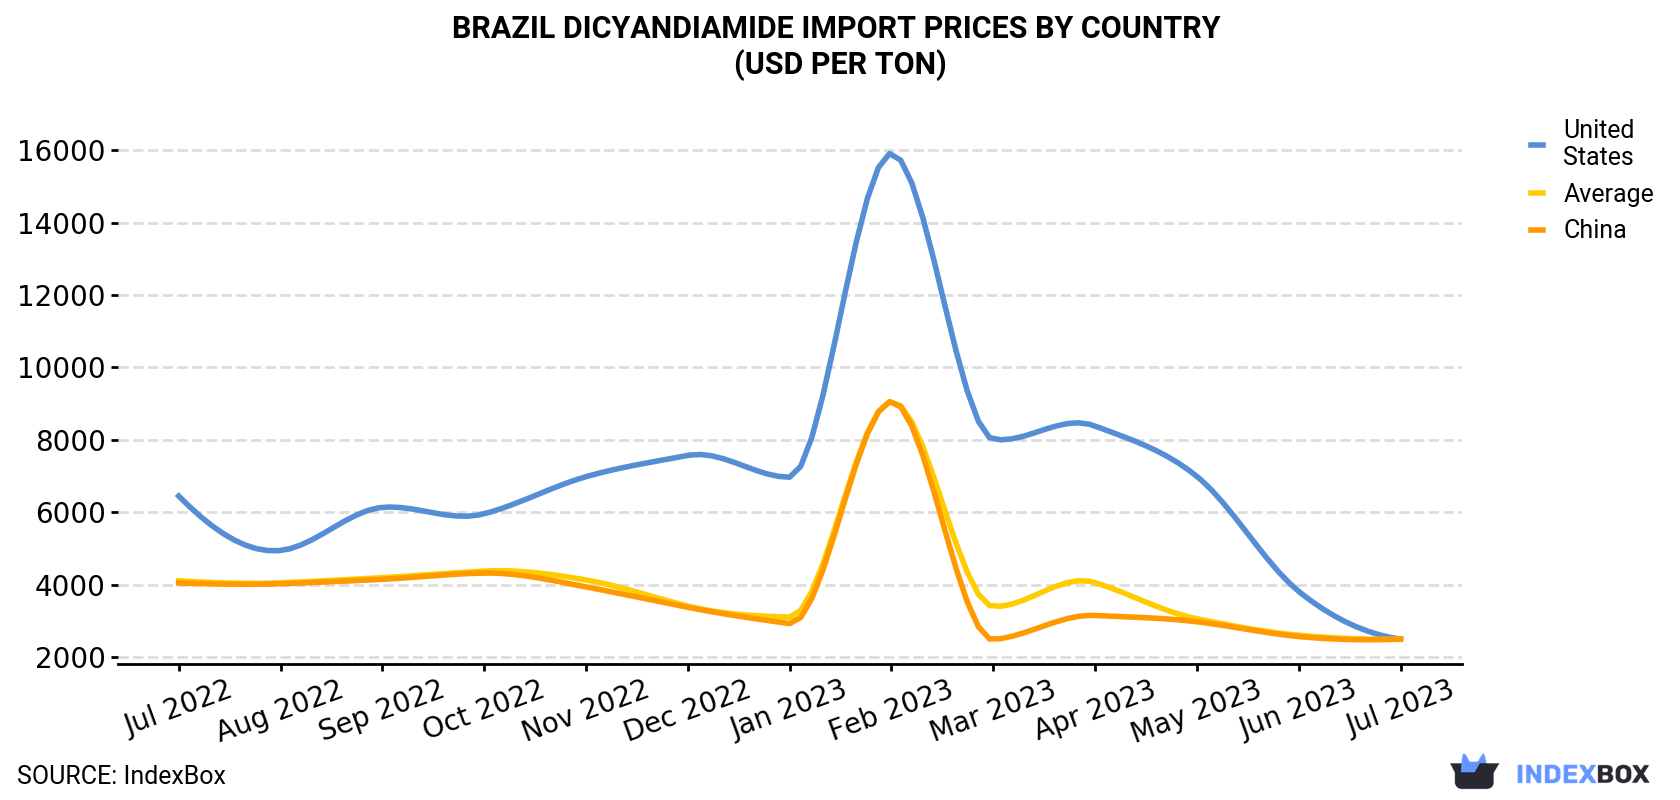 Brazil Dicyandiamide Import Prices By Country (USD Per Ton)